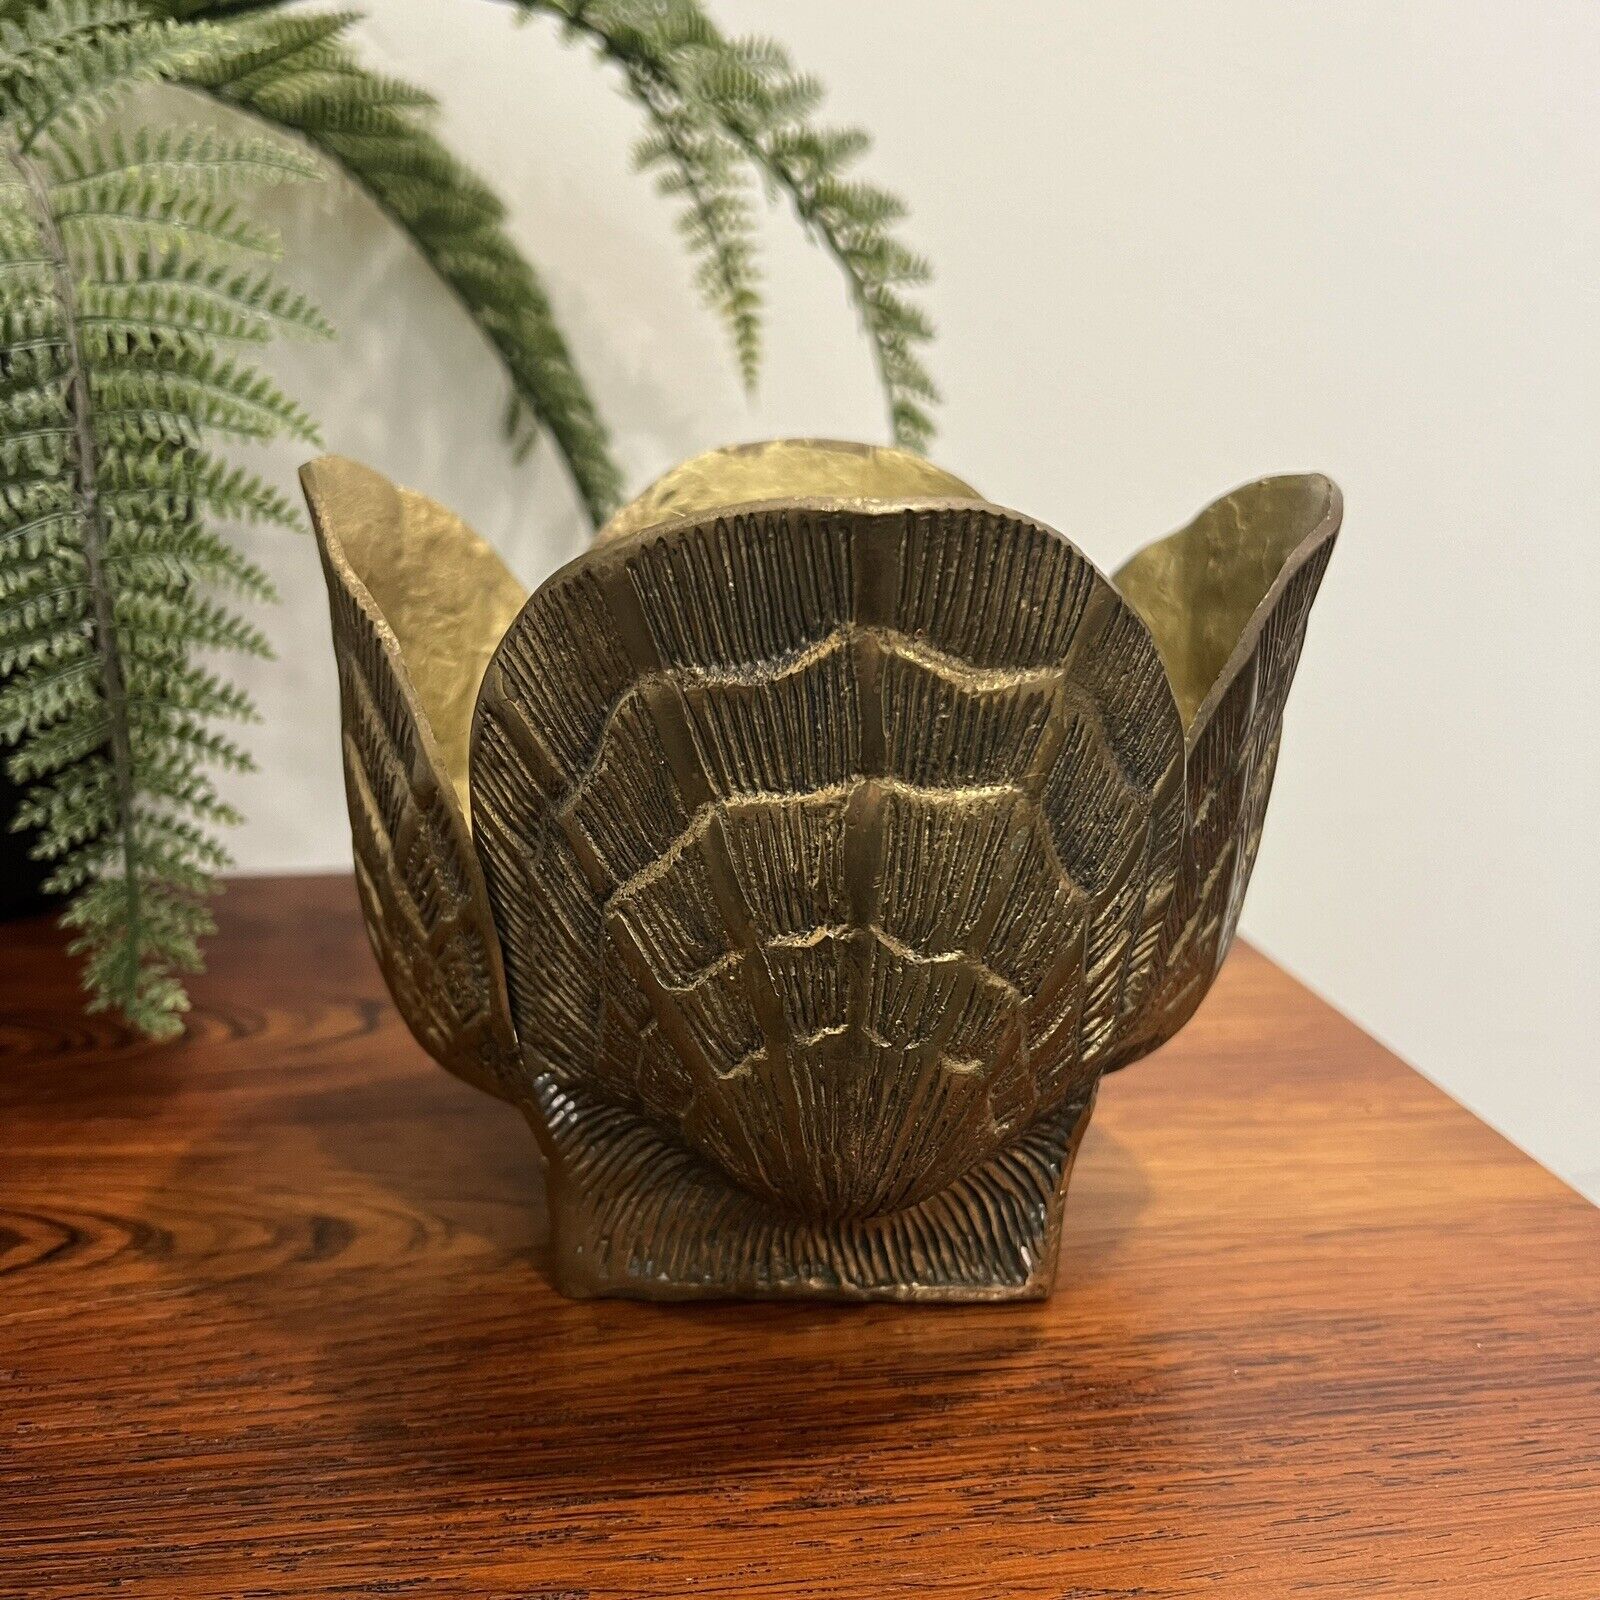 Vintage Solid Brass Seashell Clamshell Planter Pot Made in Korea